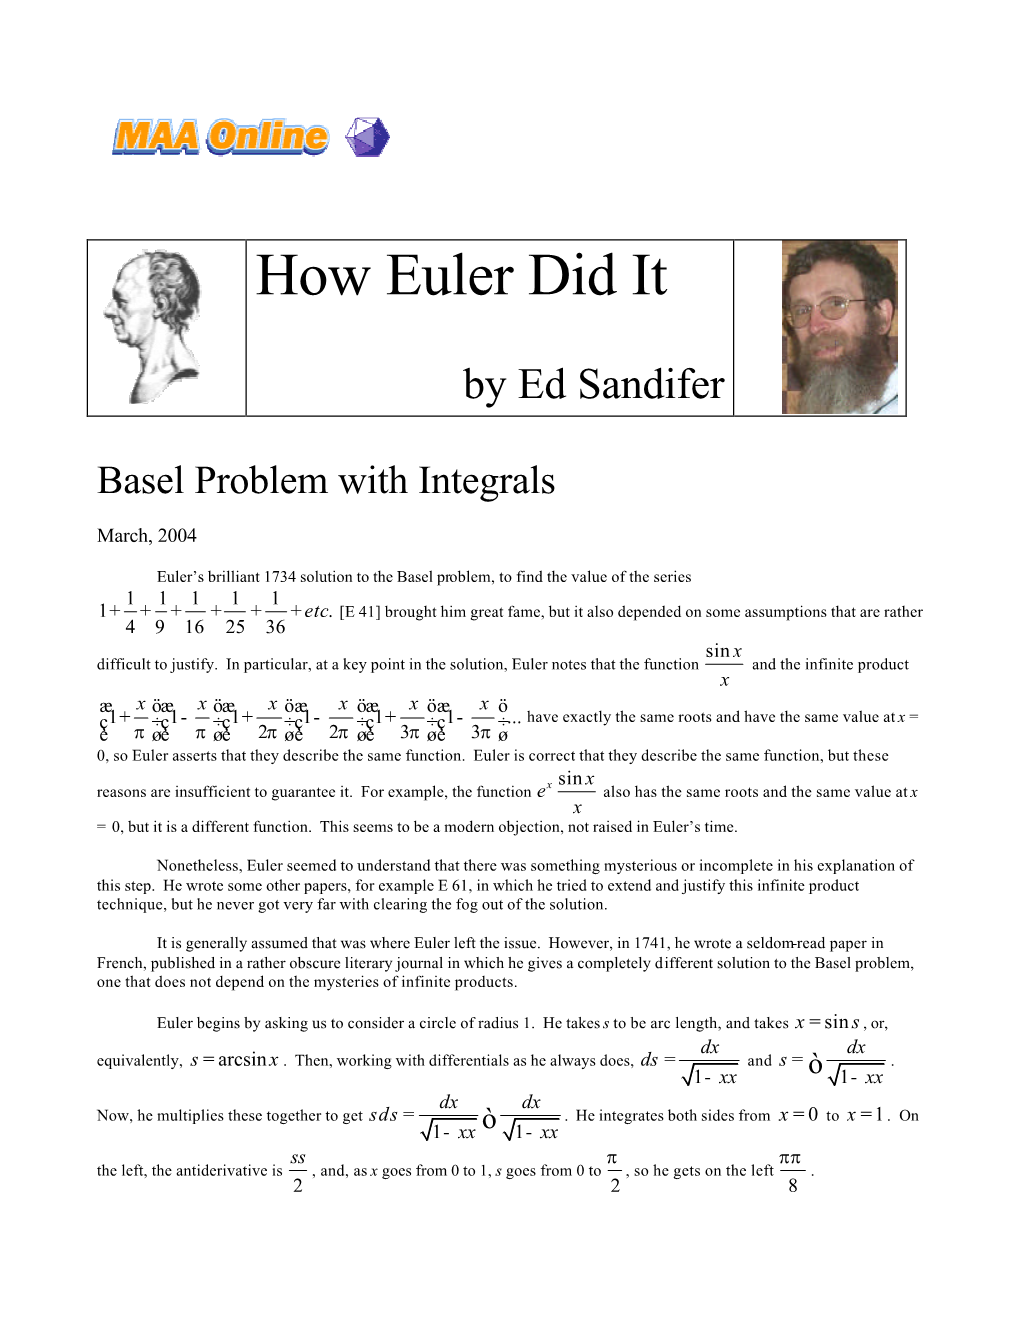 Basel Problem with Integrals